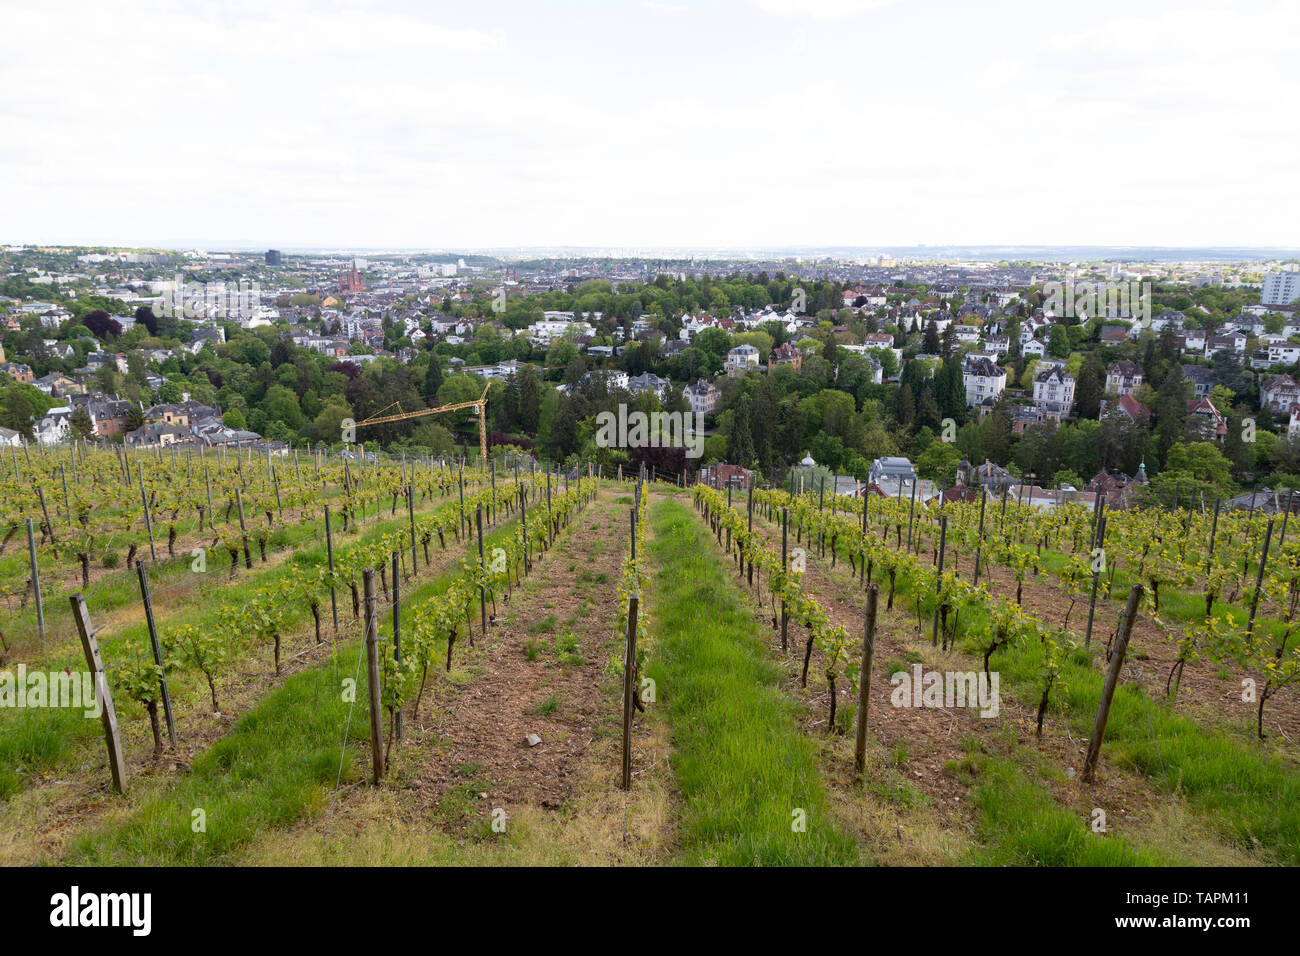 Vines at the Neroberg wine estate iin Wiesbaden, the state capital of Hesse, Germany. The vines grown on the hillside of the Neroberg. Stock Photo